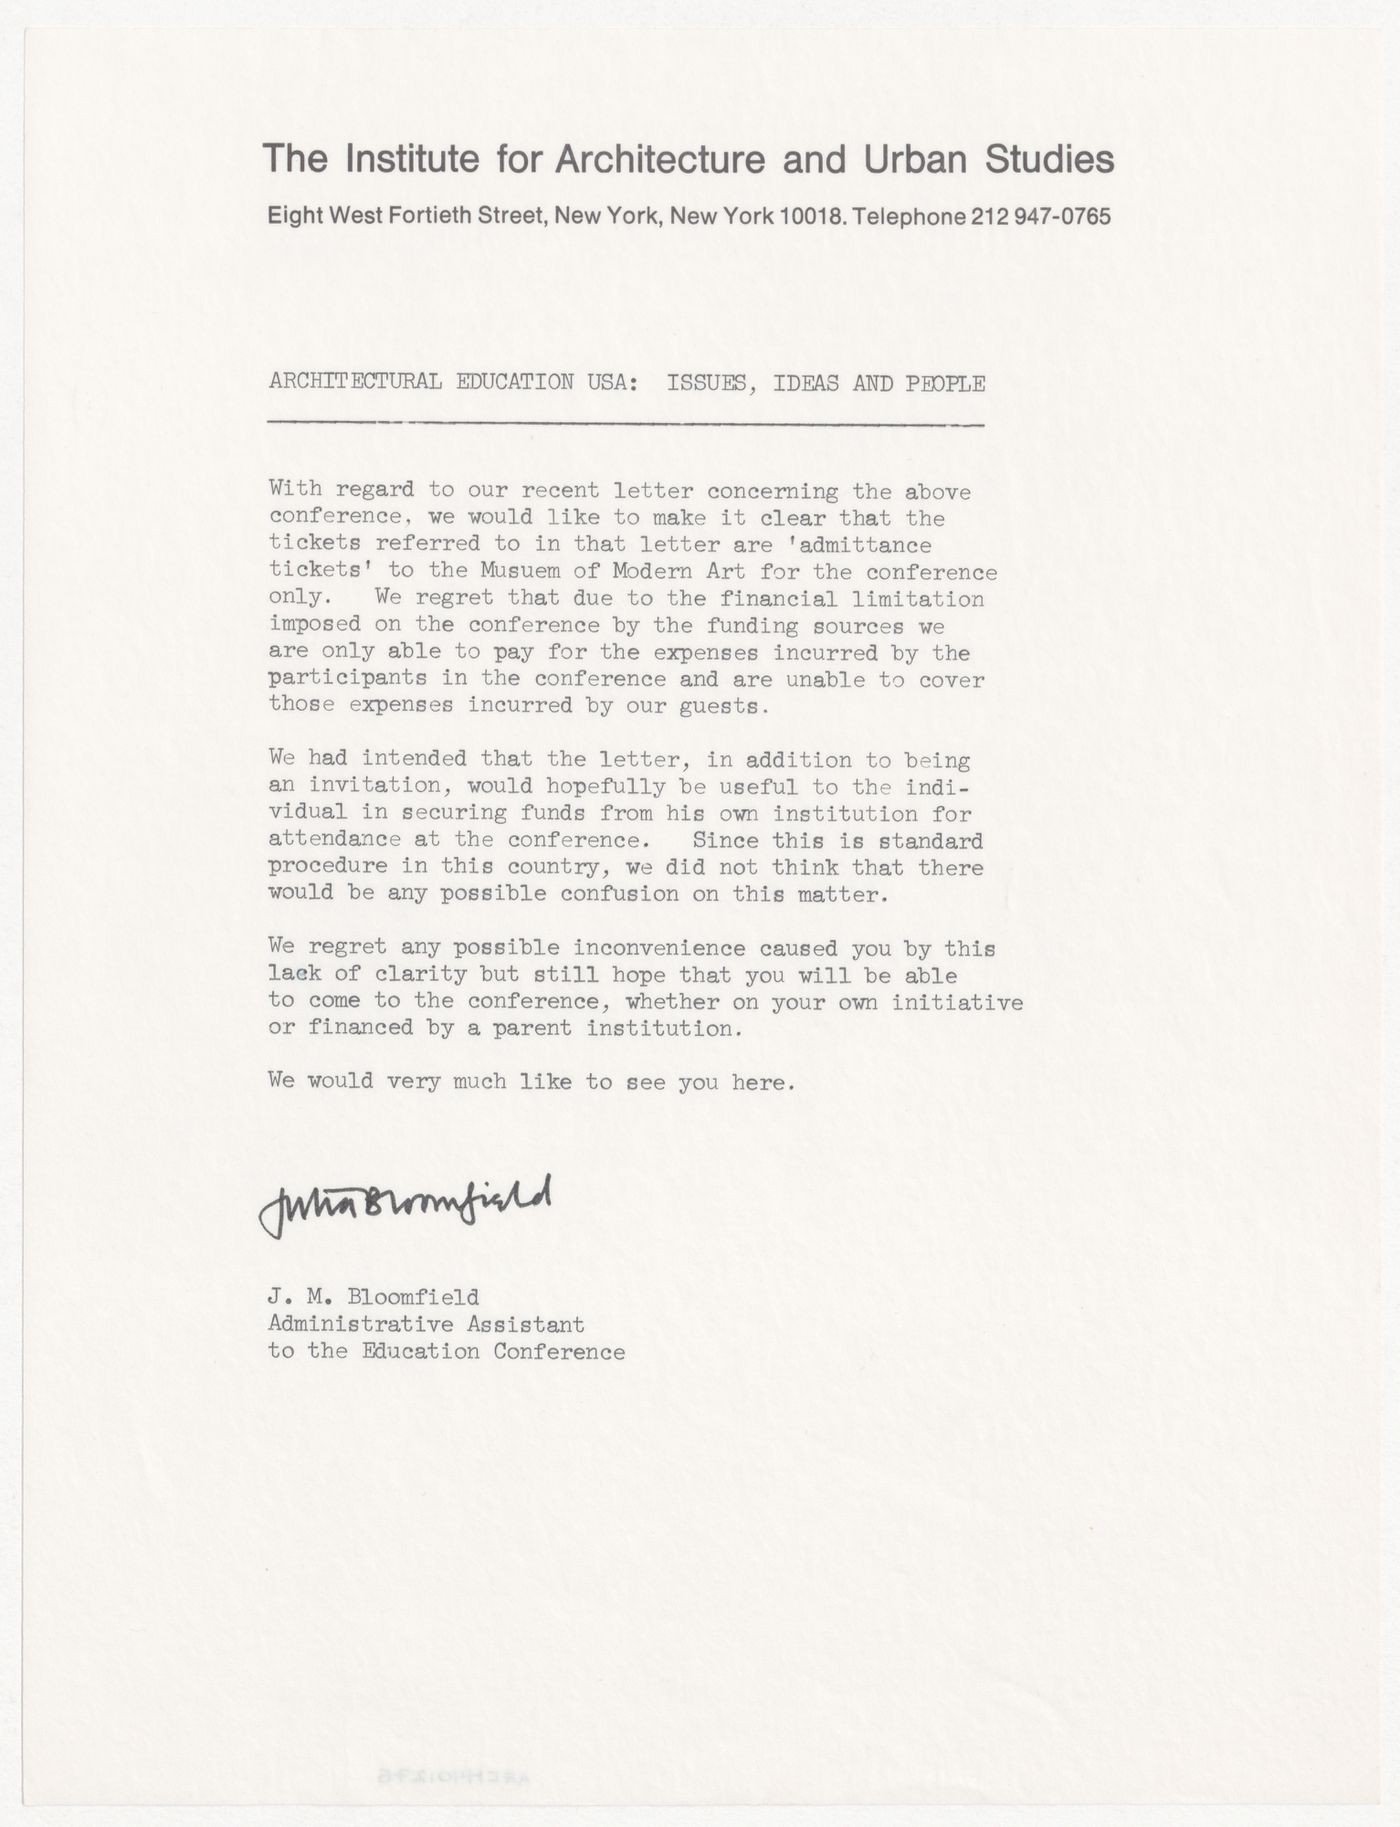 Memorandum from Julia Bloomfield about Peter D. Eisenman's invitation to Conference on Architectural Education U.S.A.